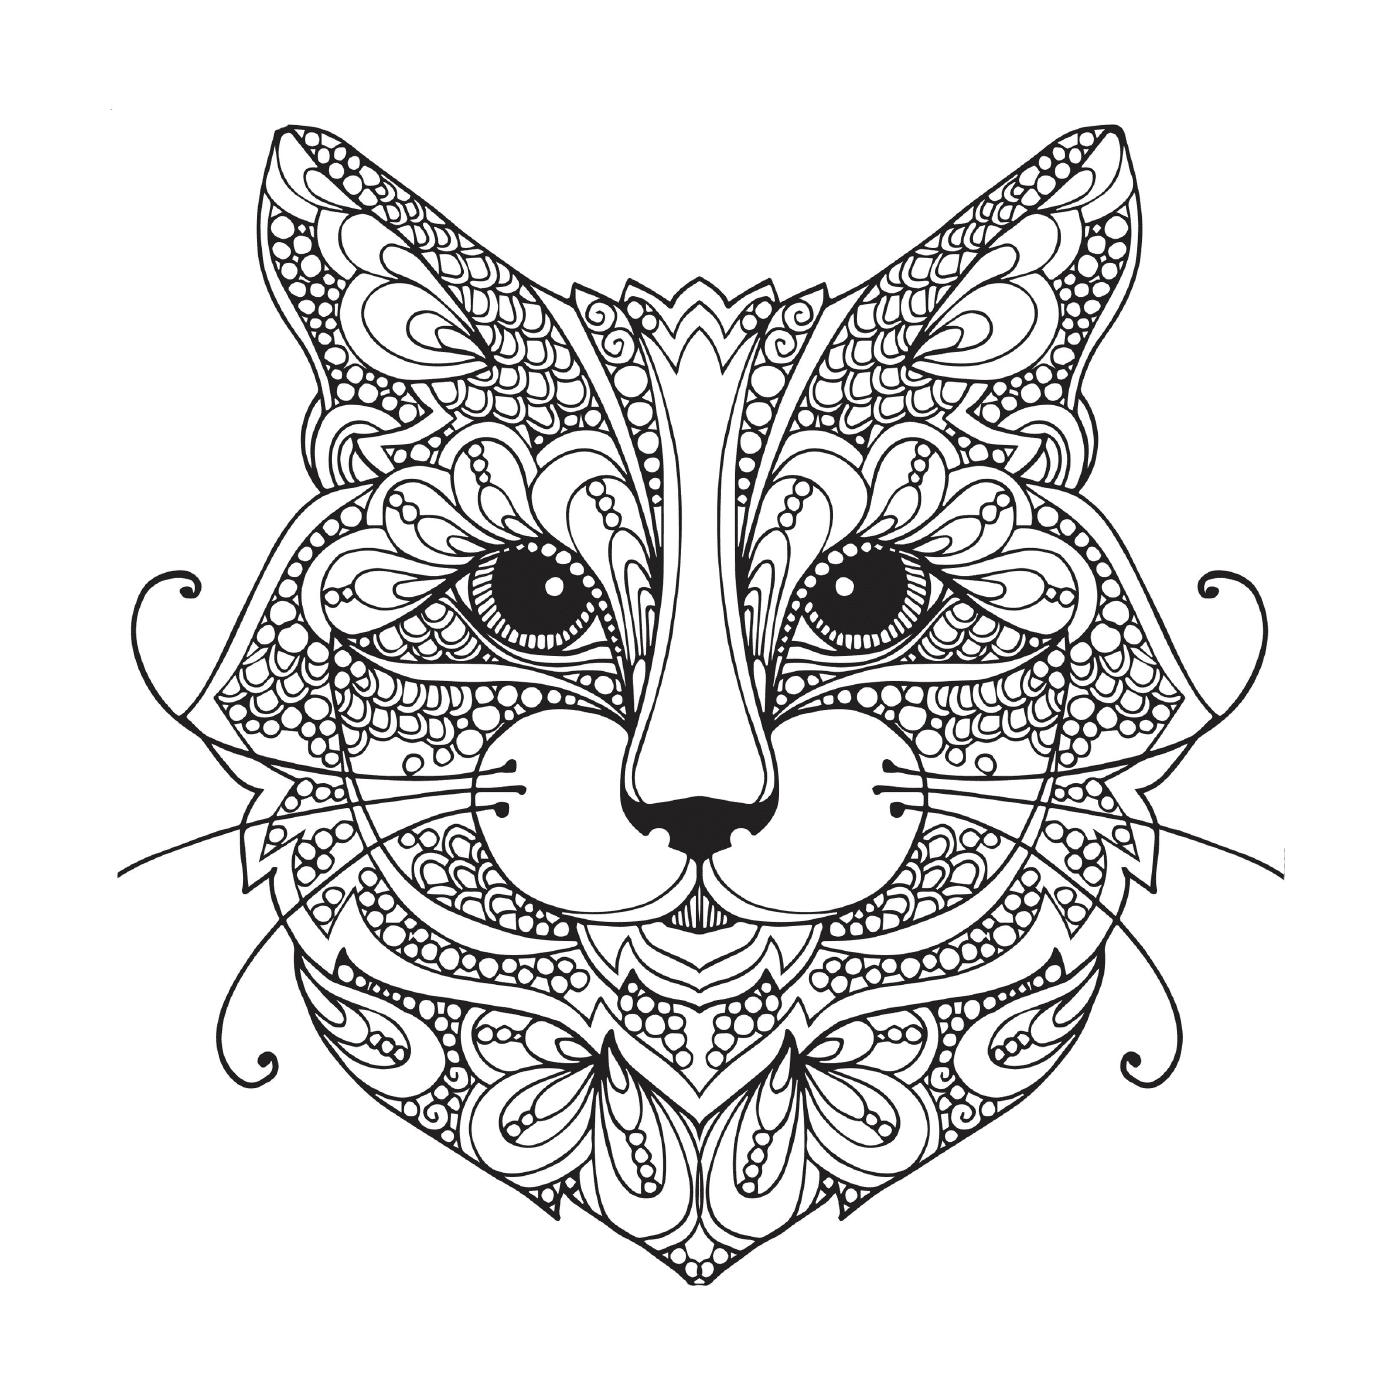  Cat with ornamental patterns on her face 